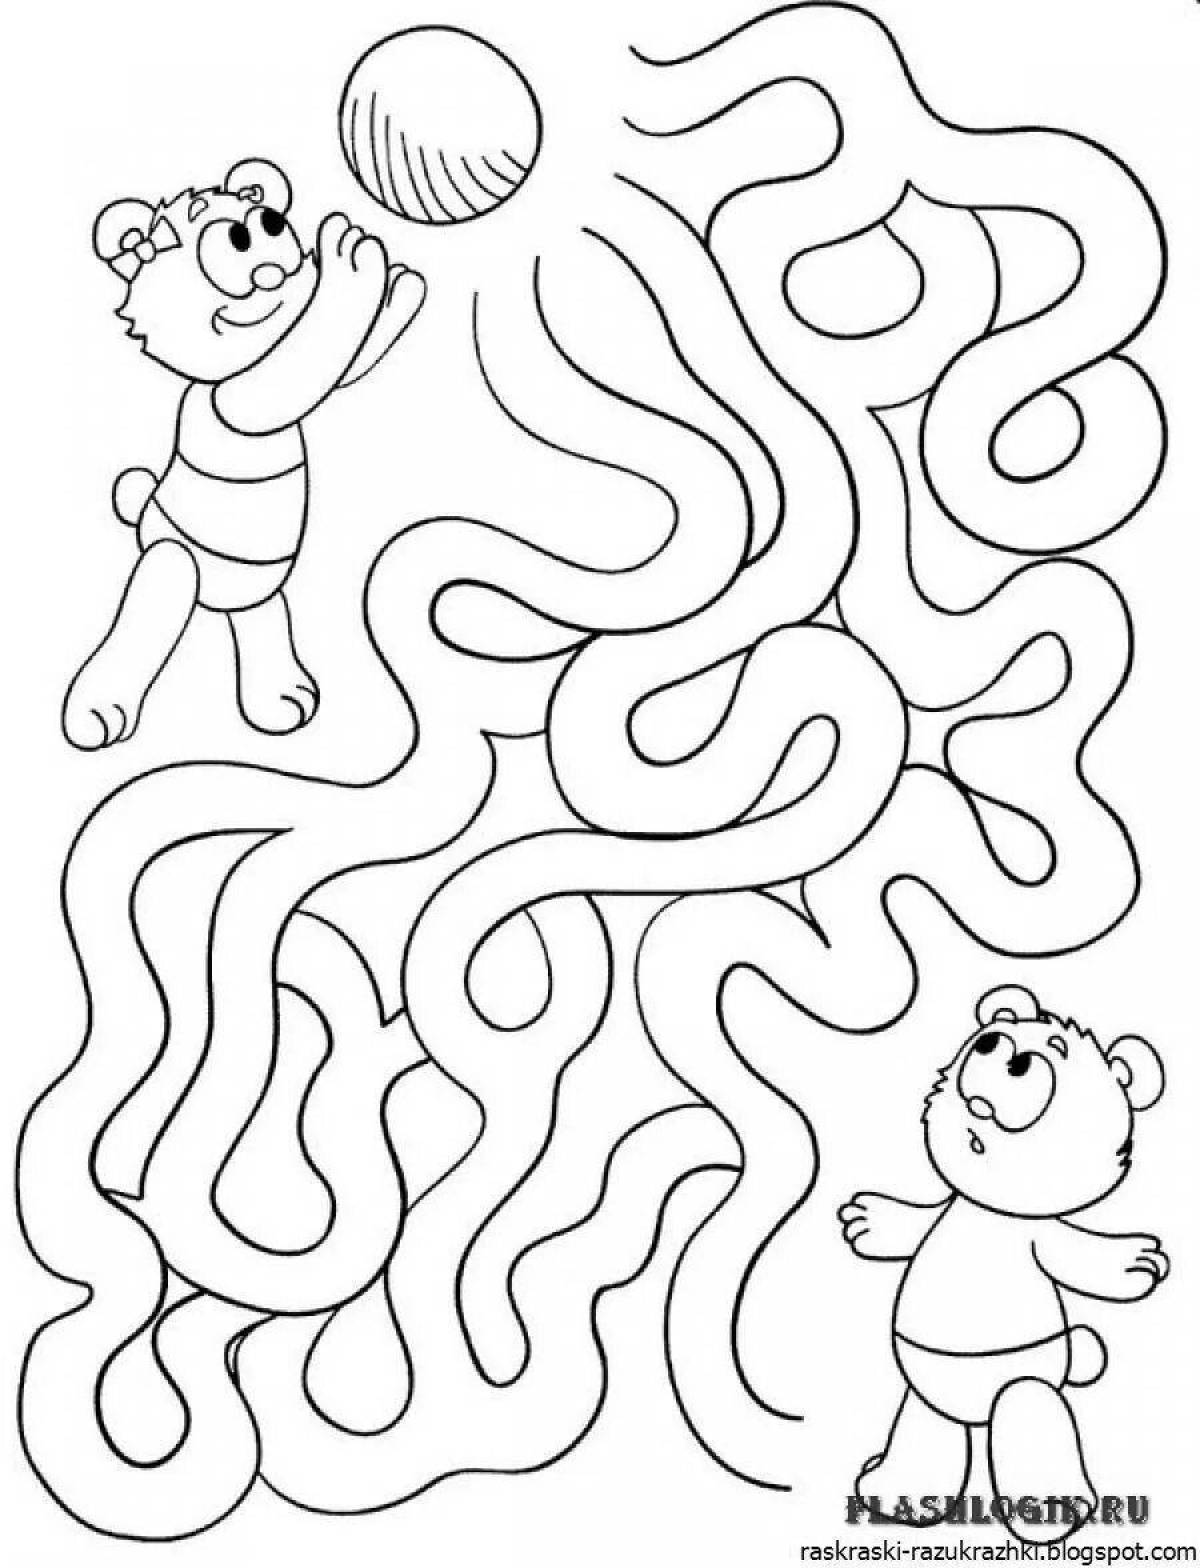 Creative coloring game for kids 3 4